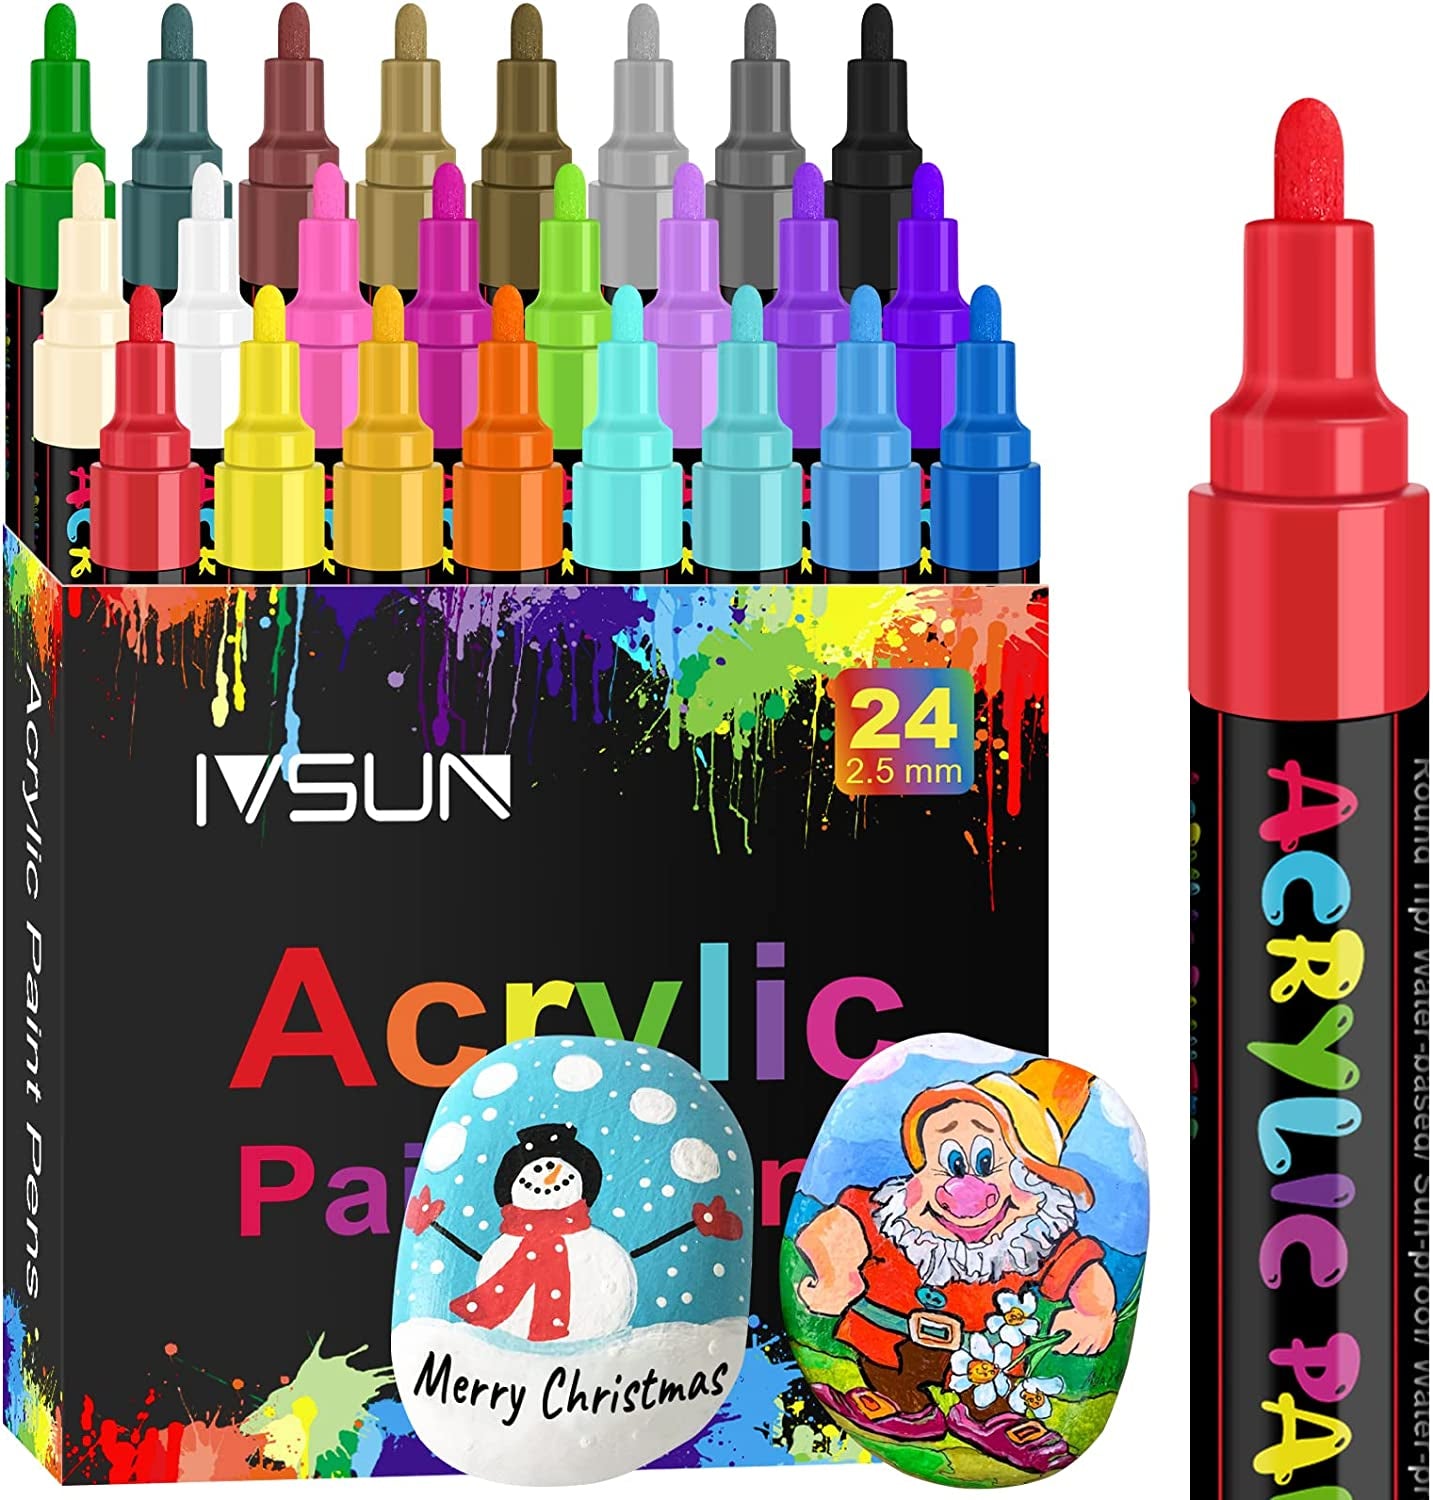 Premium Paint Pens - Acrylic Markers Extra Fine Tip For Diy Arts